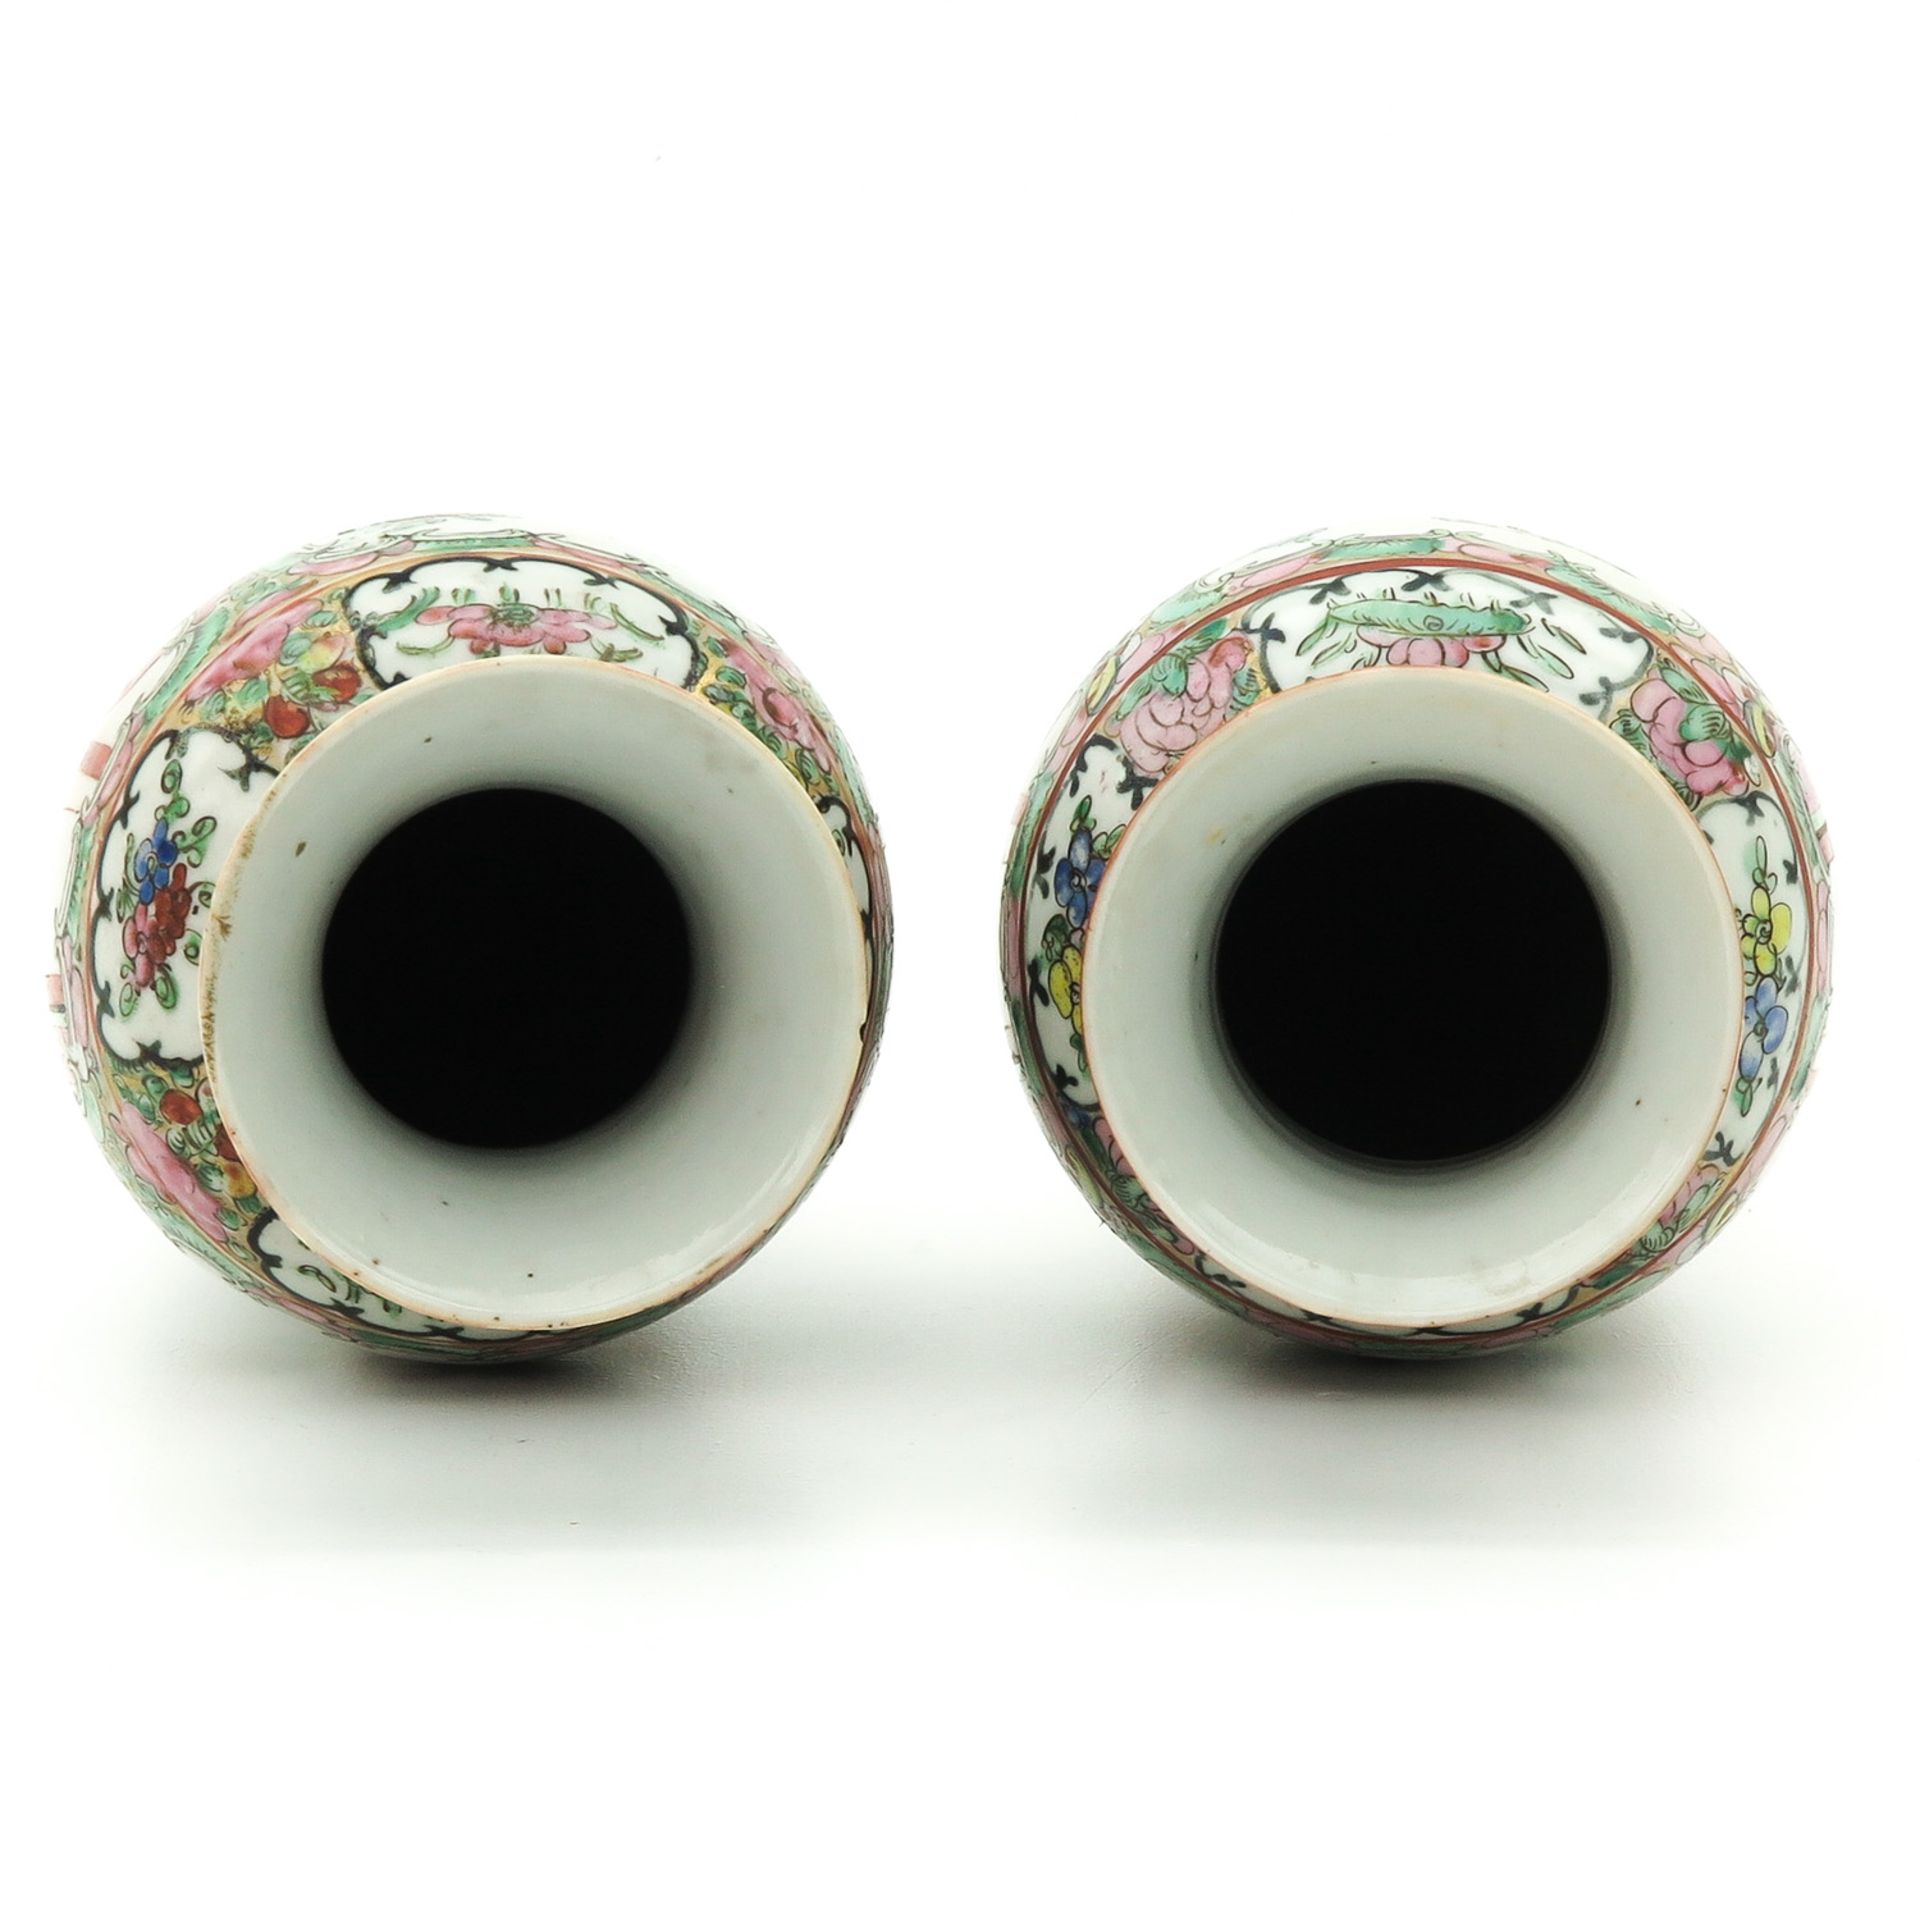 A Pair of Cantonese Vases - Image 5 of 10